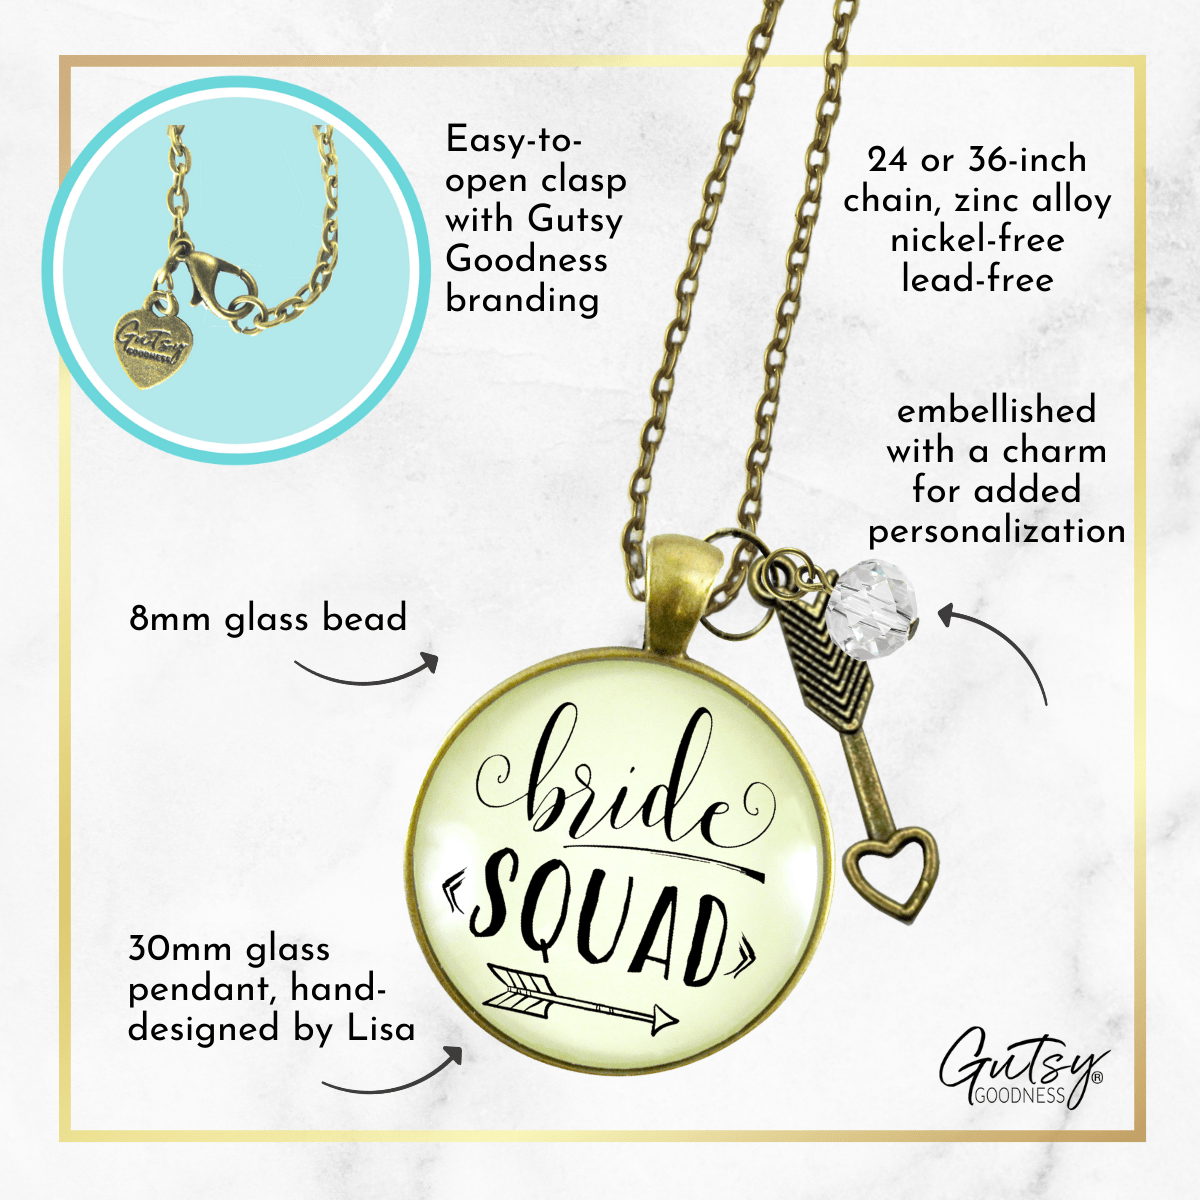 Gutsy Goodness Bride Squad Necklace Bridesmaid Vintage Wedding Design Jewelry Gift - Gutsy Goodness;Bride Squad Necklace Bridesmaid Vintage Wedding Design Jewelry Gift - Gutsy Goodness Handmade Jewelry Gifts